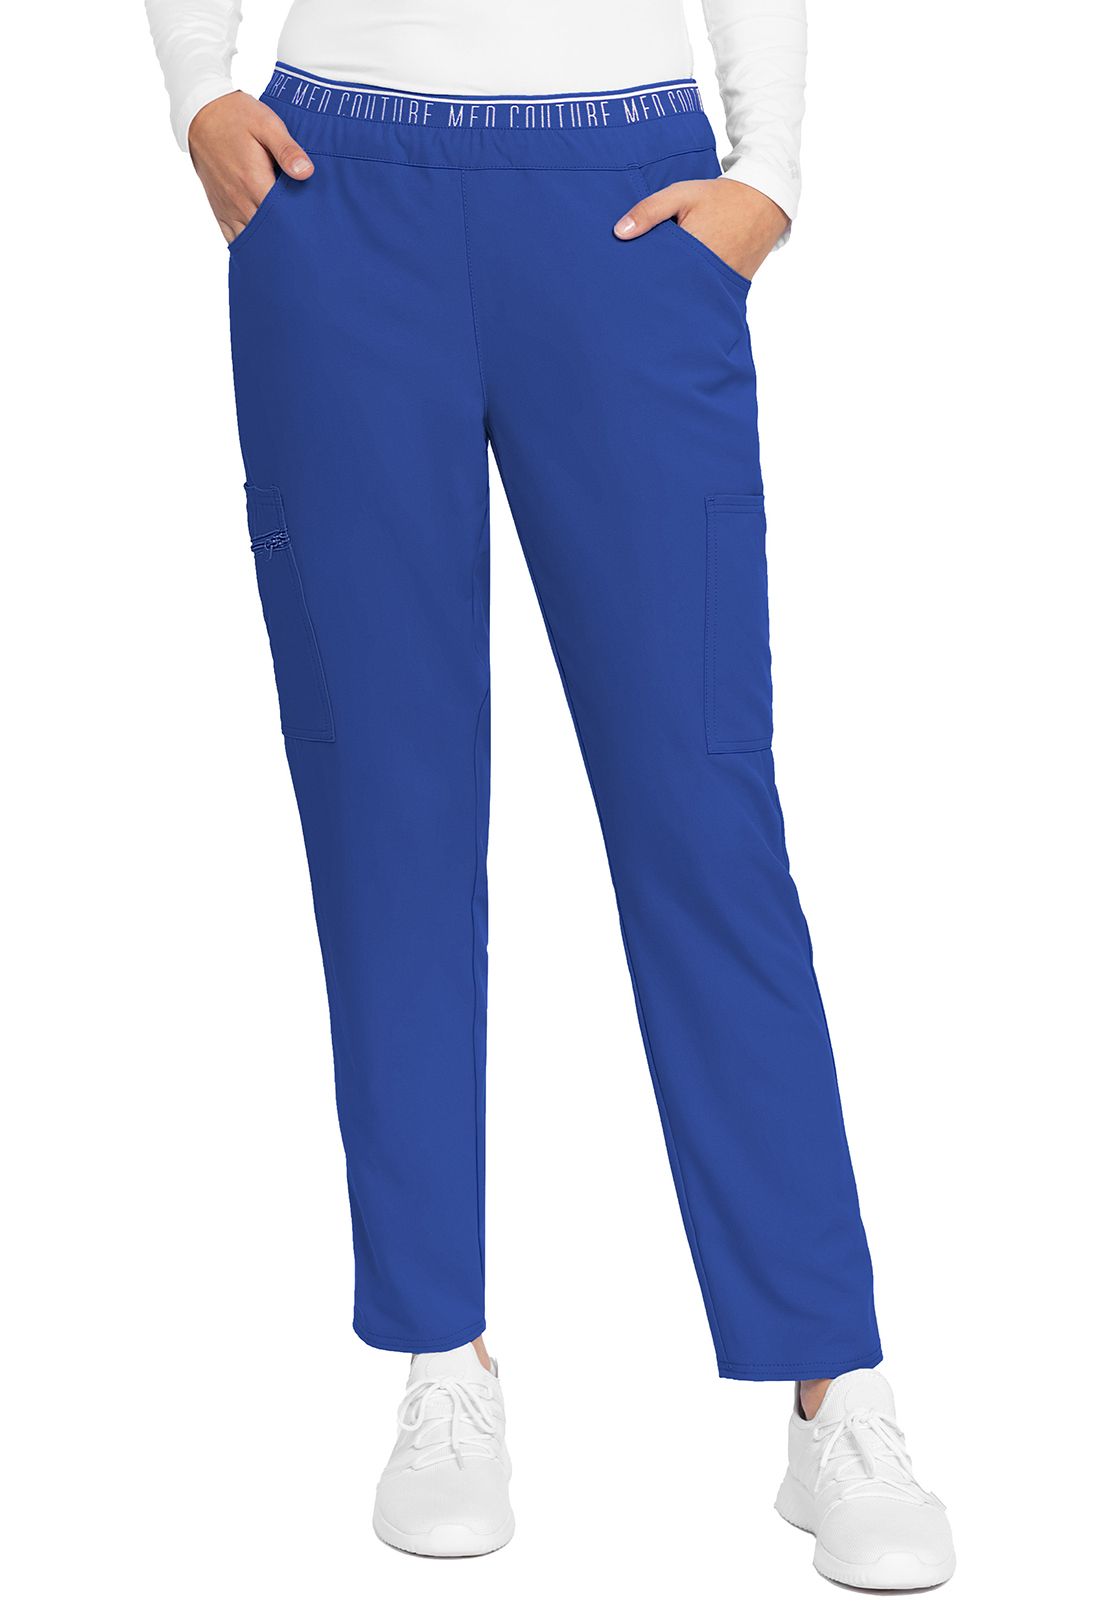 Mid-rise Tapered Leg Pull-on Pant-Med Couture